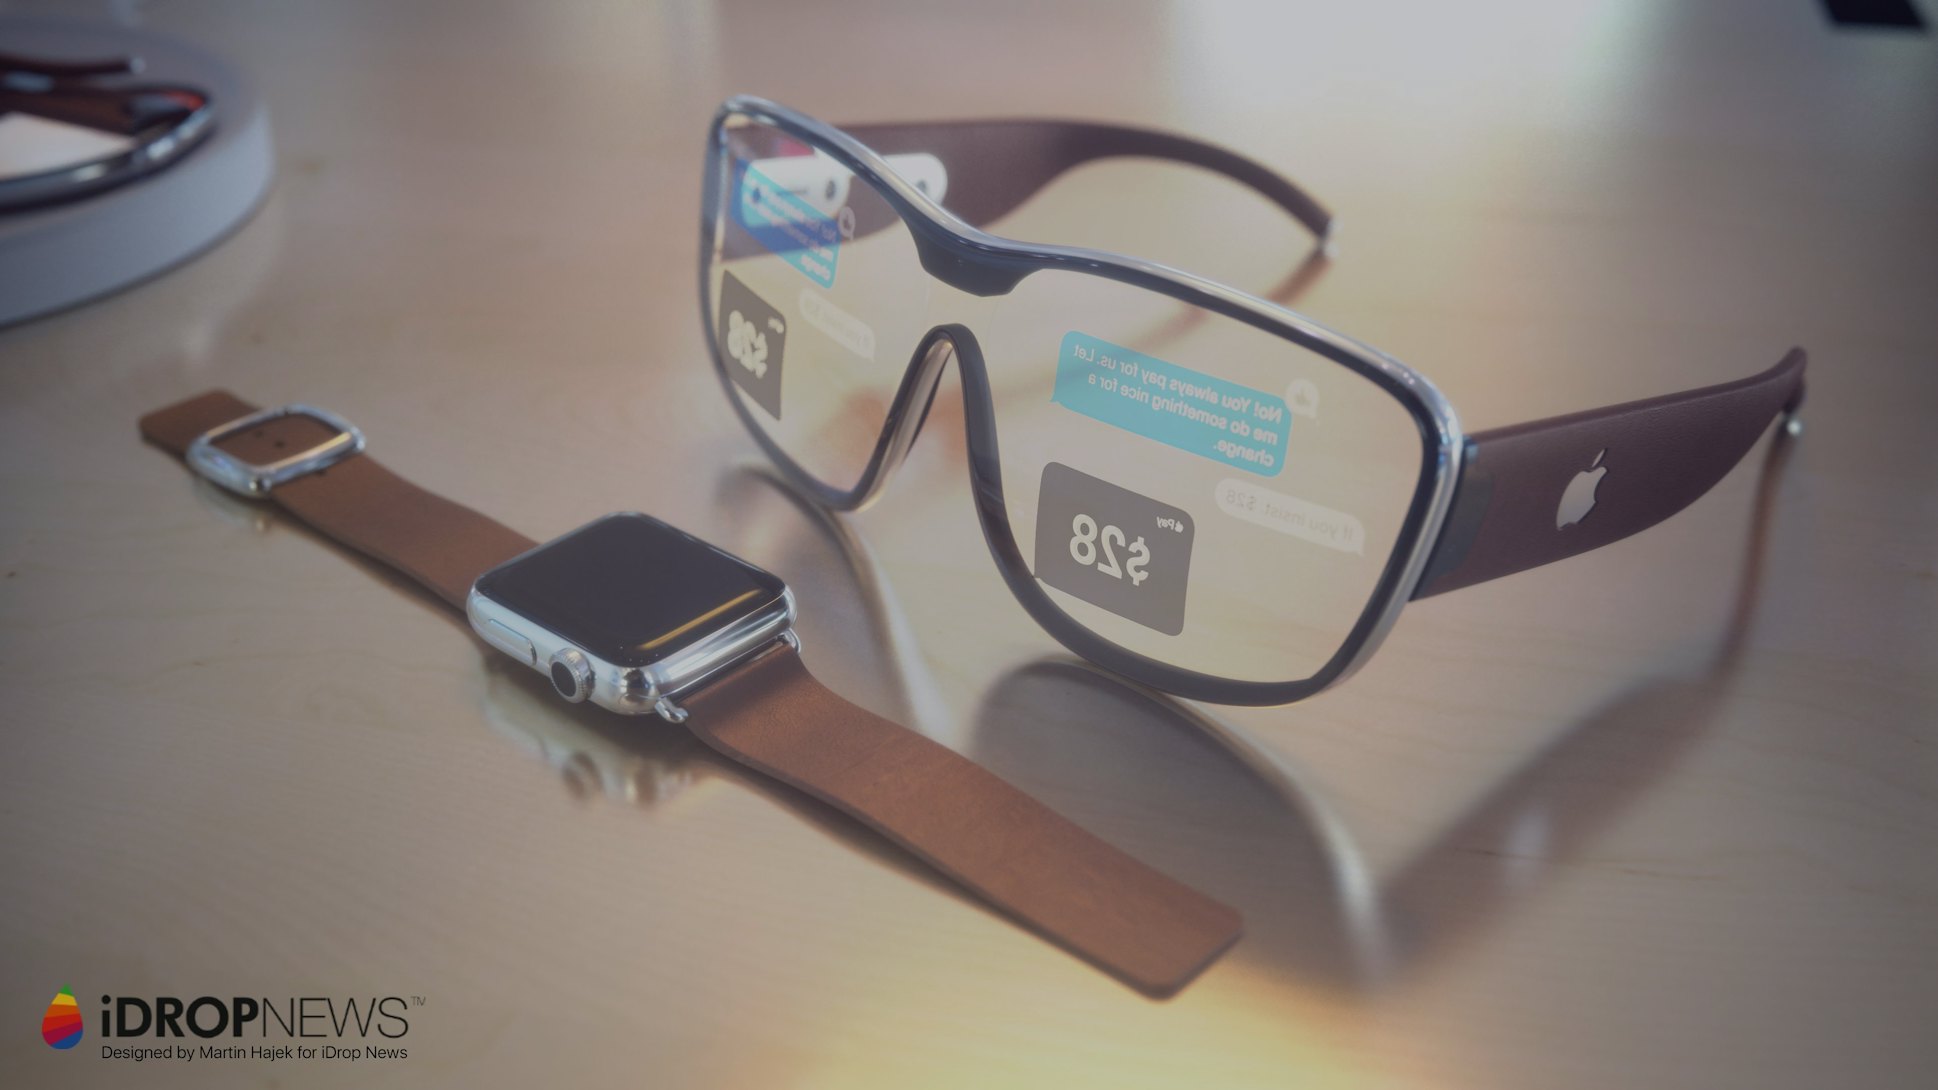 Smart glasses are getting ready for an iPad moment in 2022 - CNET